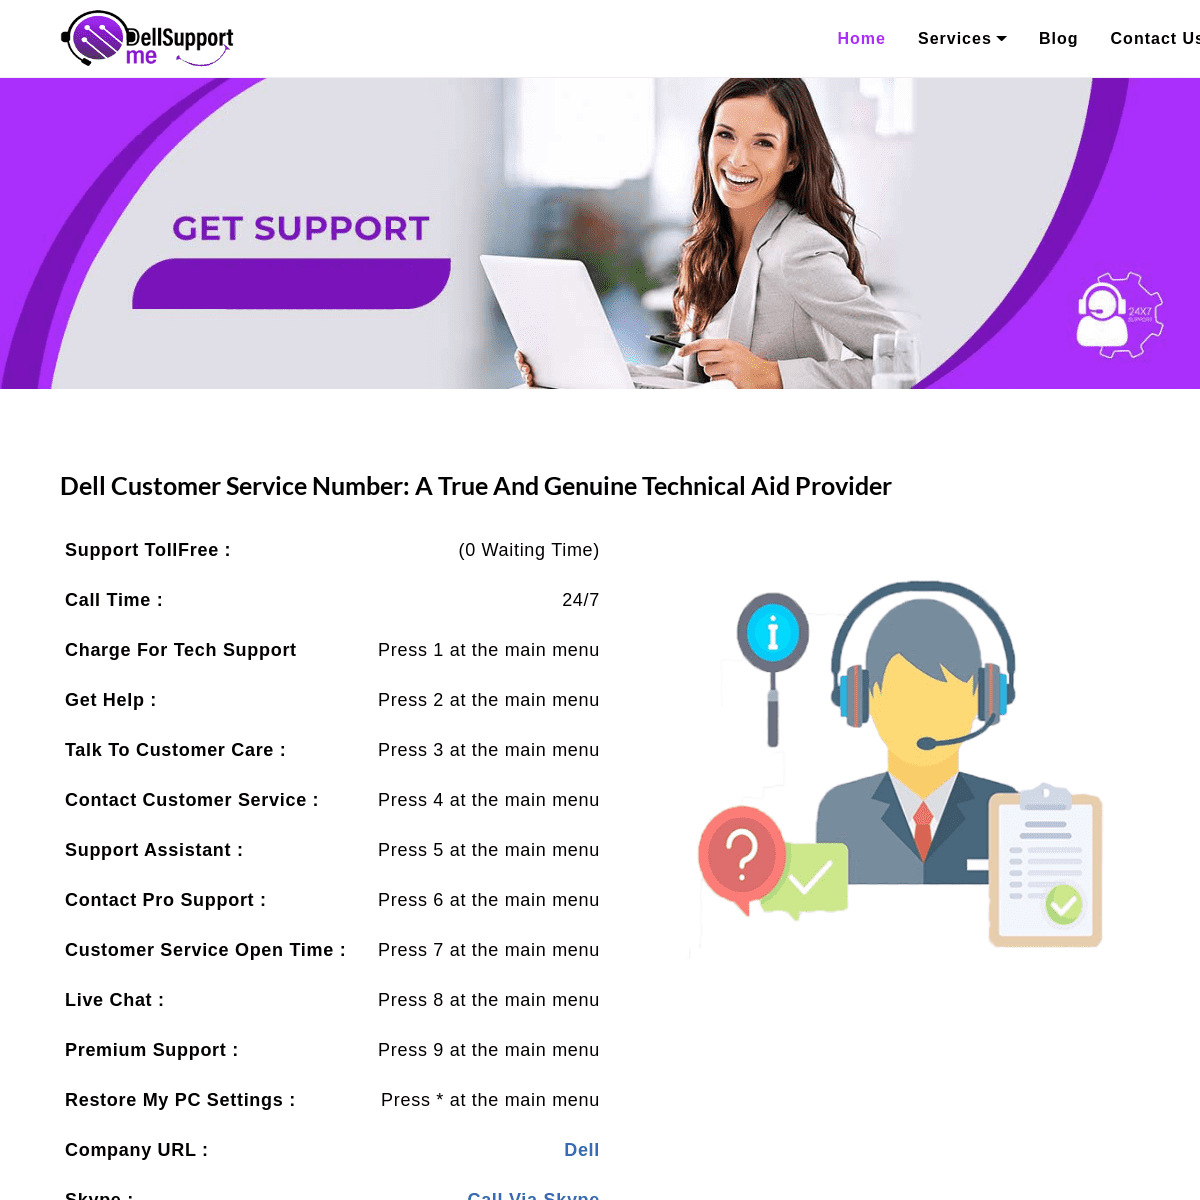 A complete backup of https://dellsupportme.com